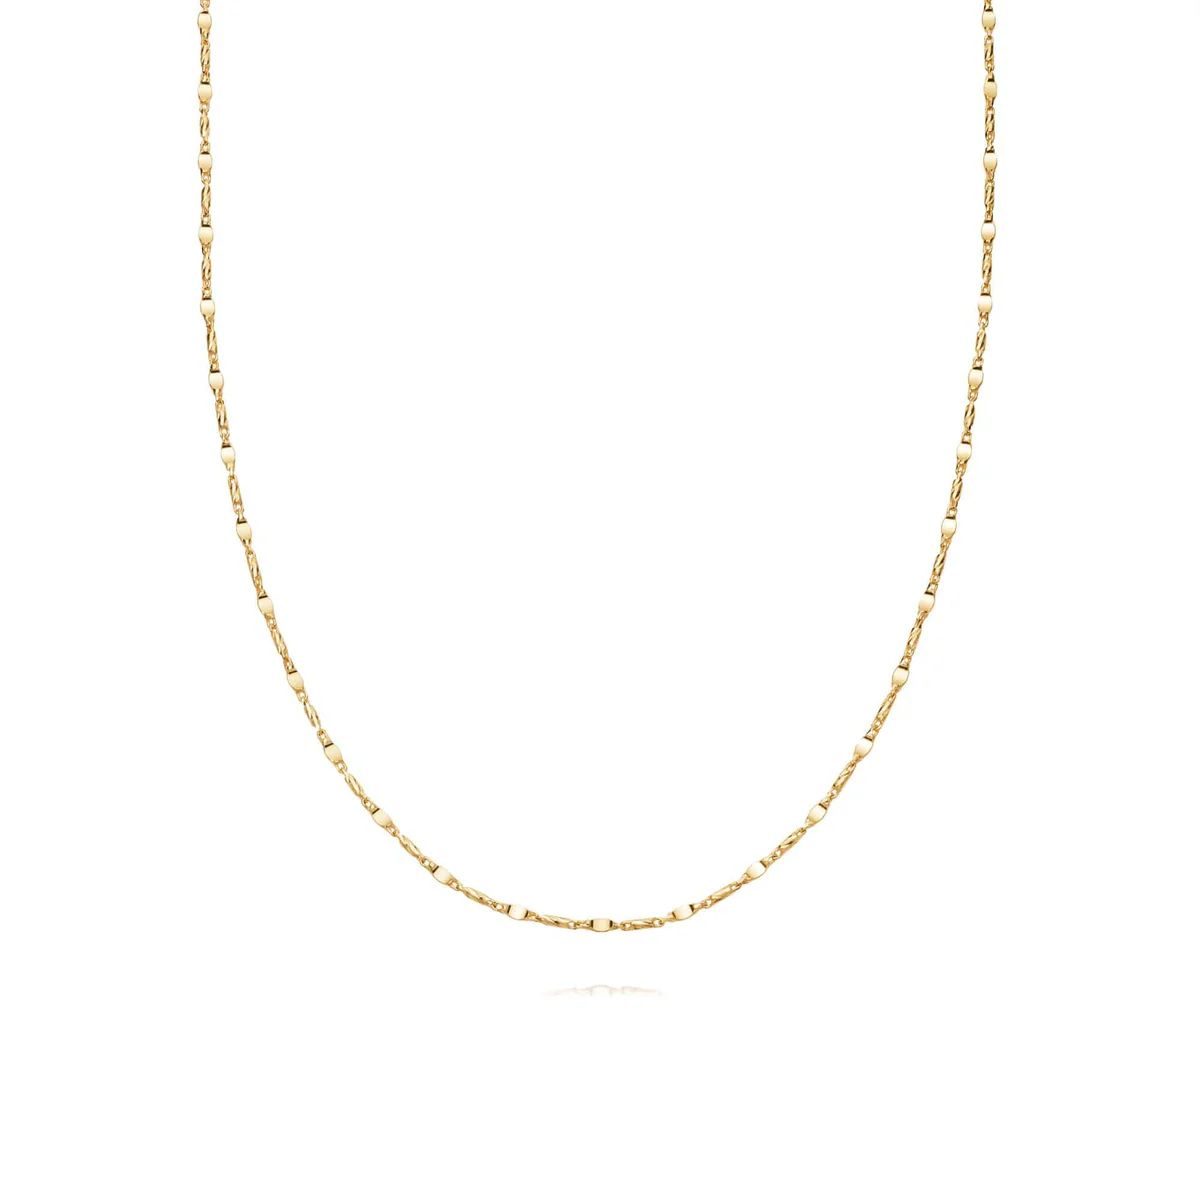 Tidal Twist Chain Necklace 18ct Gold Plate | Daisy London Jewellery